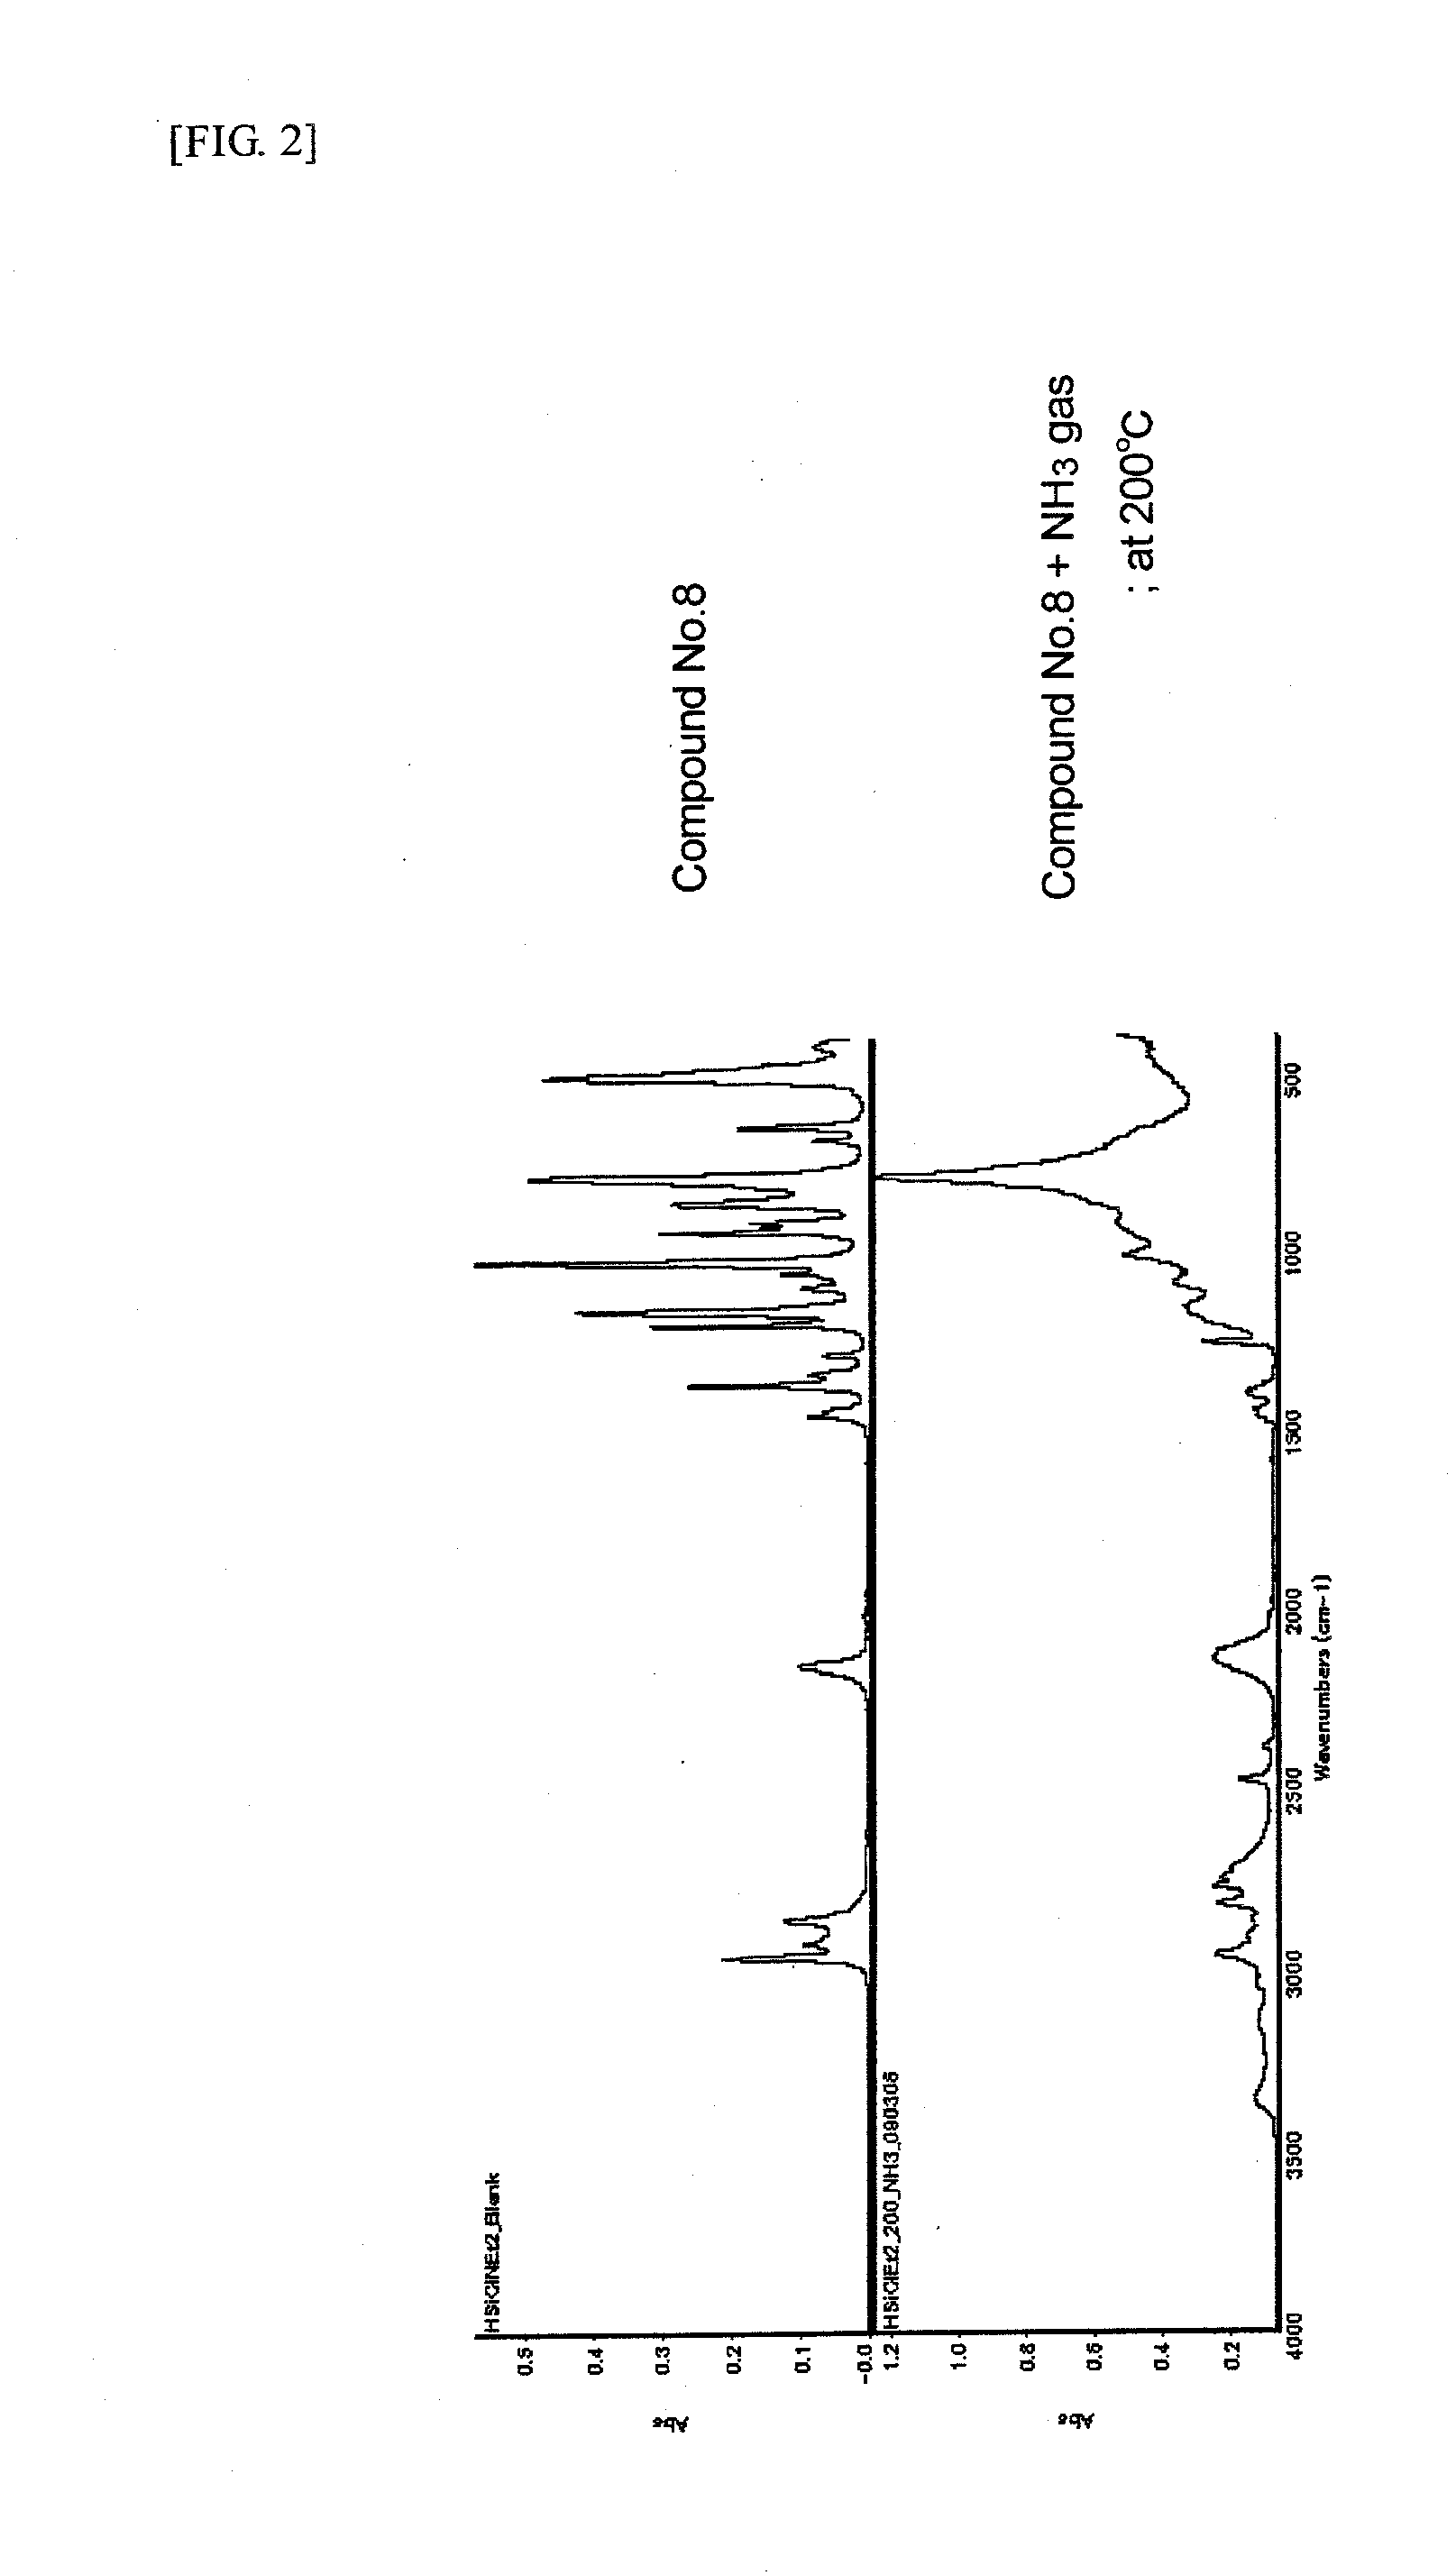 Material for chemical vapor deposition and process for forming silicon-containing thin film using same